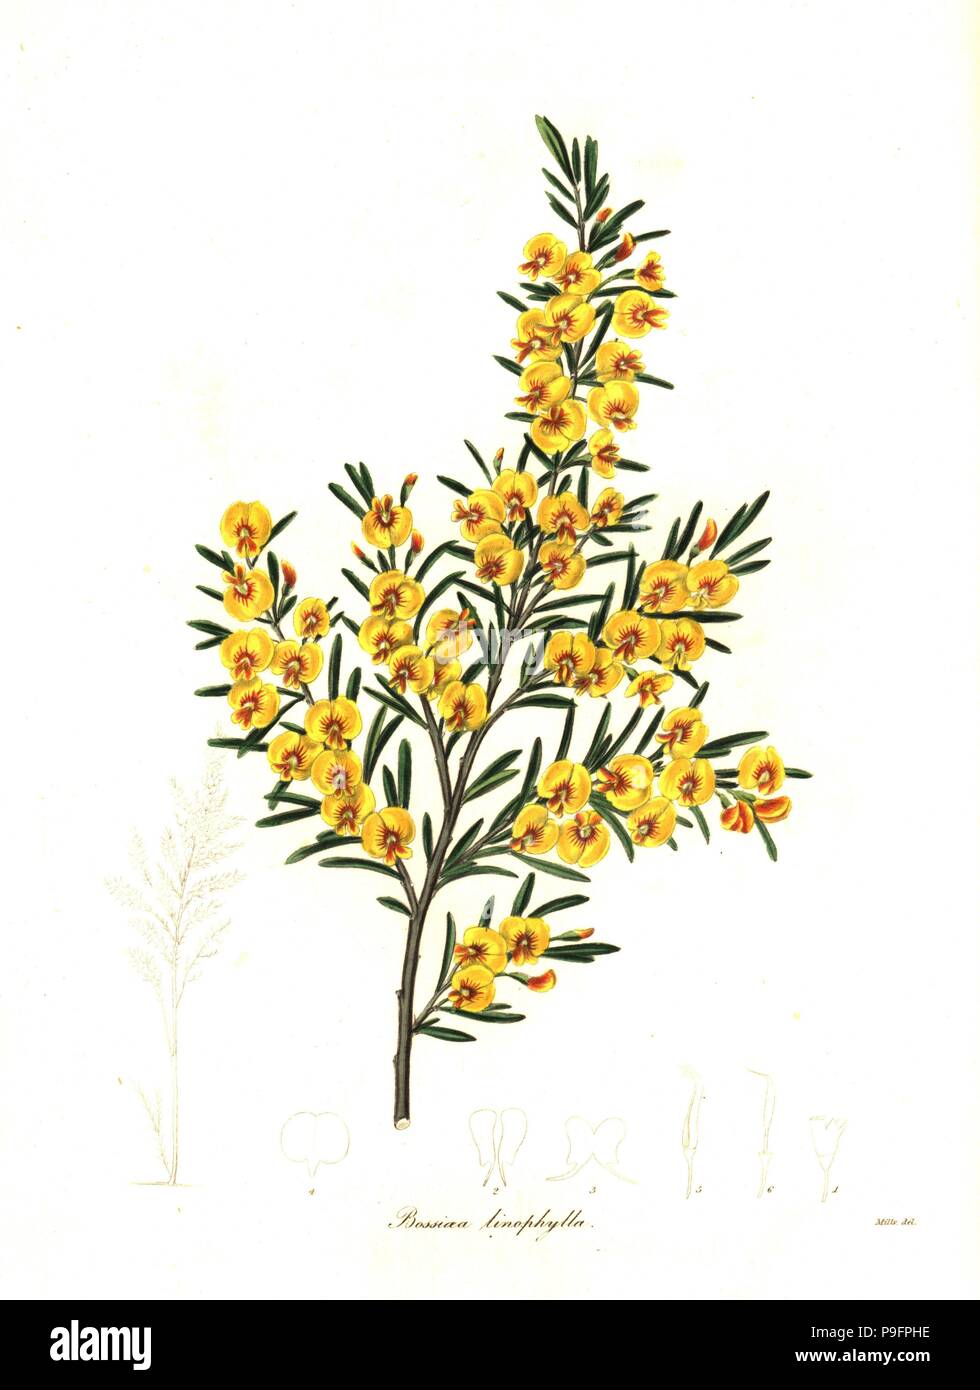 Flax-leaved bossiaea, Bossiaea linophylla. Handcoloured copperplate engraving after a botanical illustration by Mills from Benjamin Maund and the Rev. John Stevens Henslow's The Botanist, London, 1836. Stock Photo